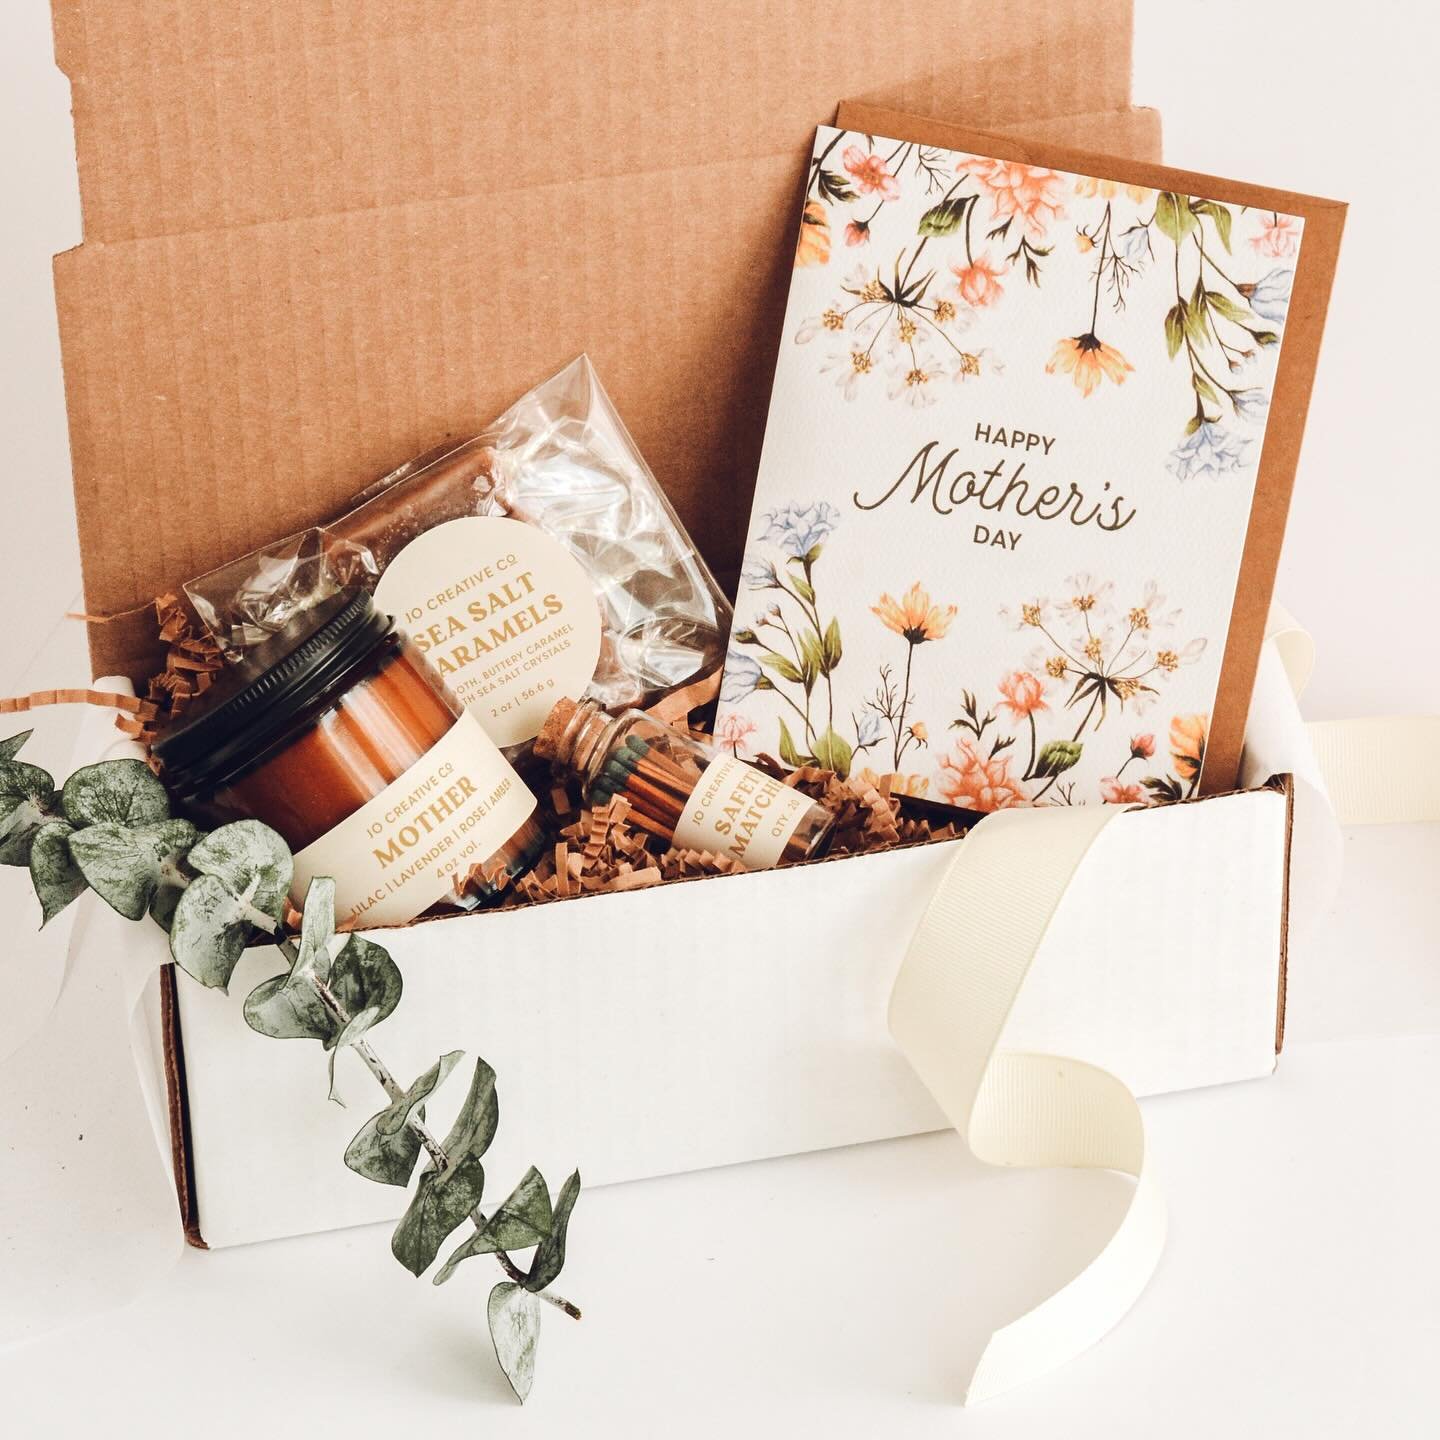 Mother&rsquo;s Day Gift Boxes // Pre-orders now open

Made especially for the mother&rsquo;s in your life! Treat them with a gift box including all their favourites. Personalize your Mother&rsquo;s Day gift box by selecting your own card, and the siz